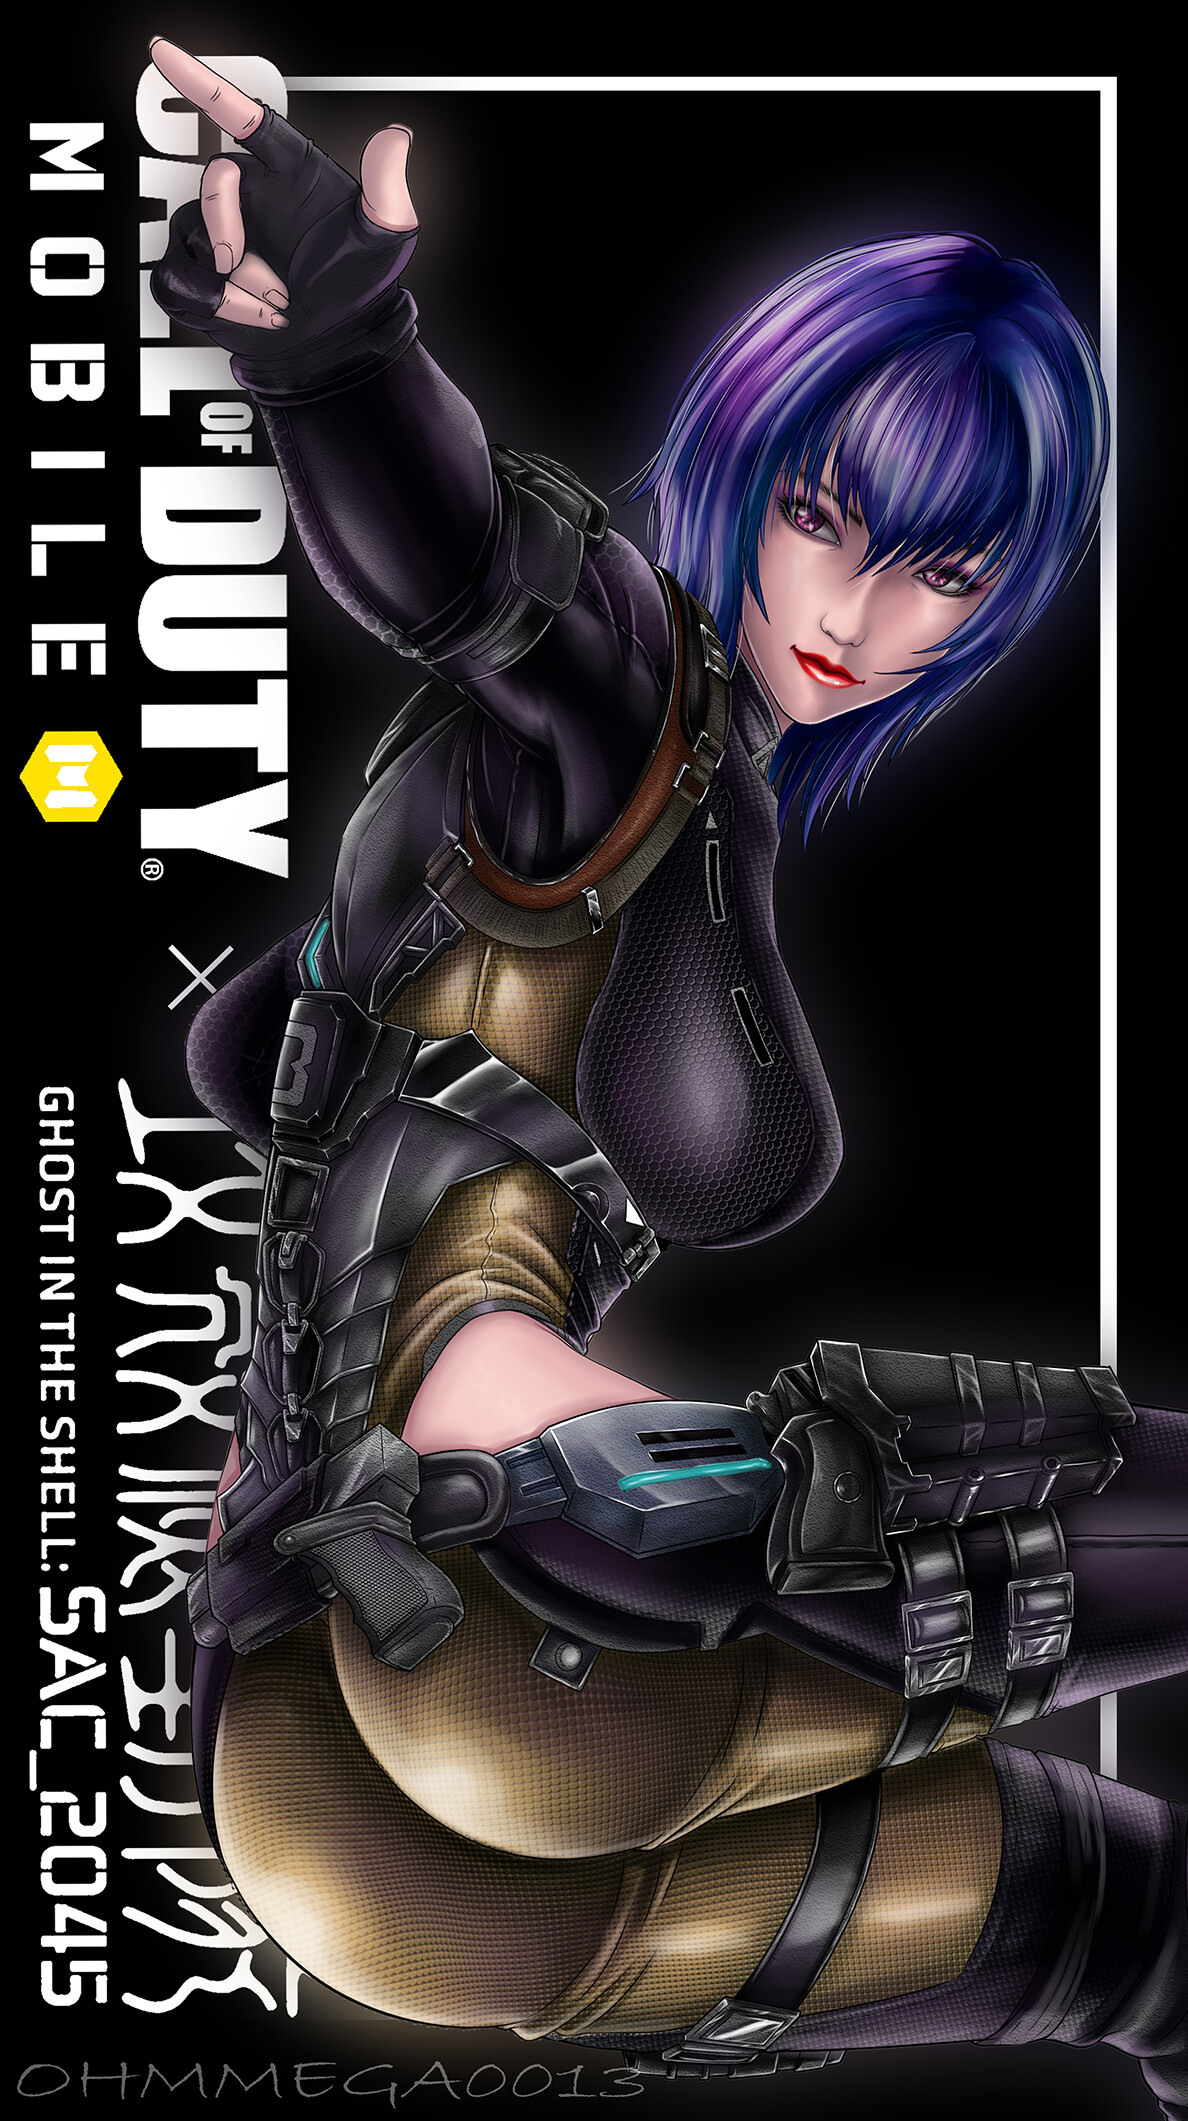 Motoko - Ghost in the Shell (Call of Duty Mobile-fan art) by ohmmega0013 image